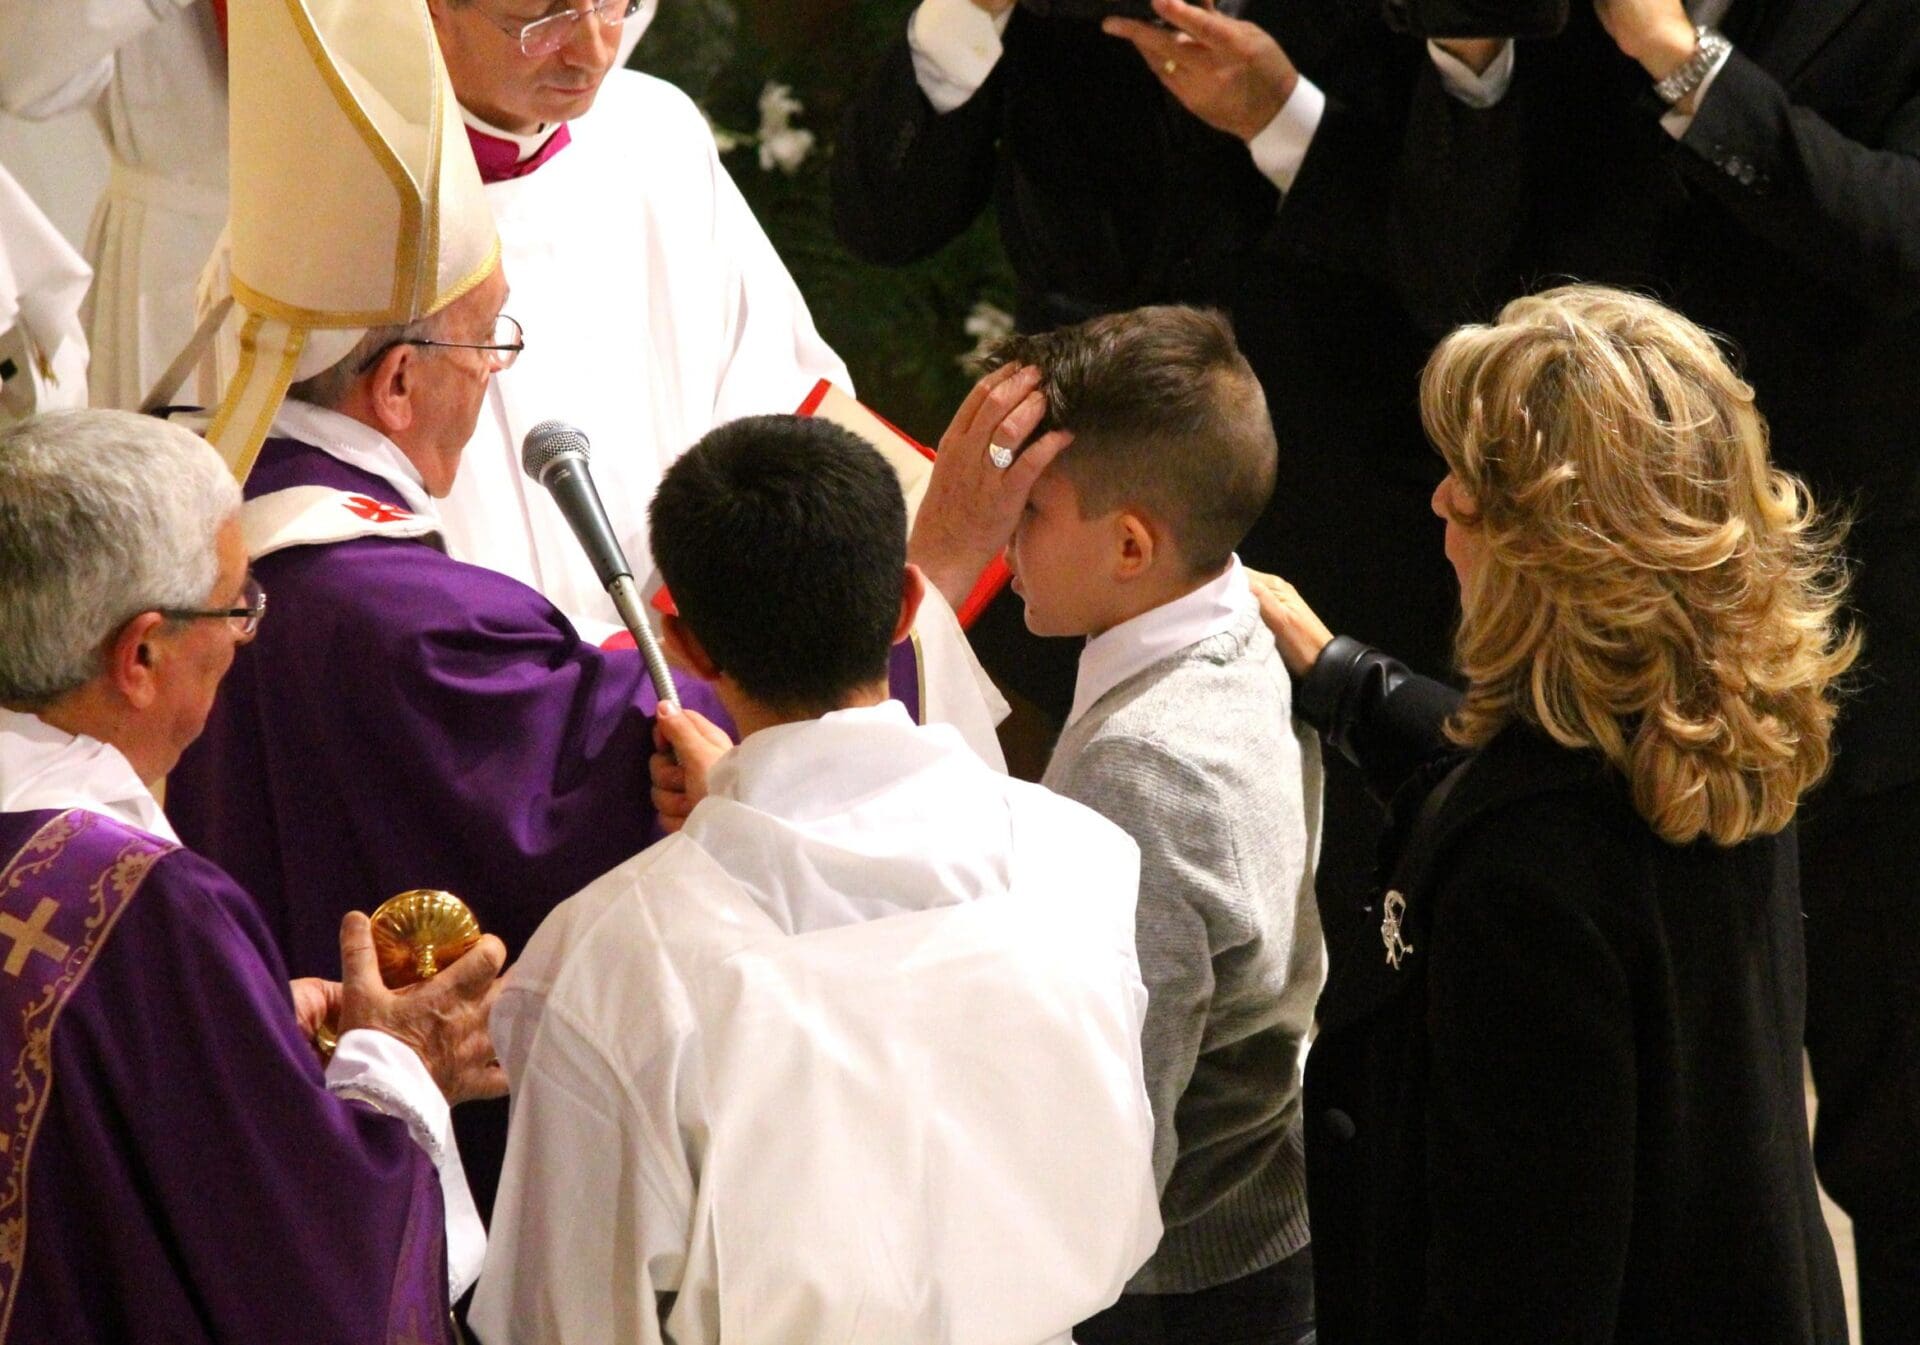 On the Sacrament of Confirmation and Its Liturgical Celebration